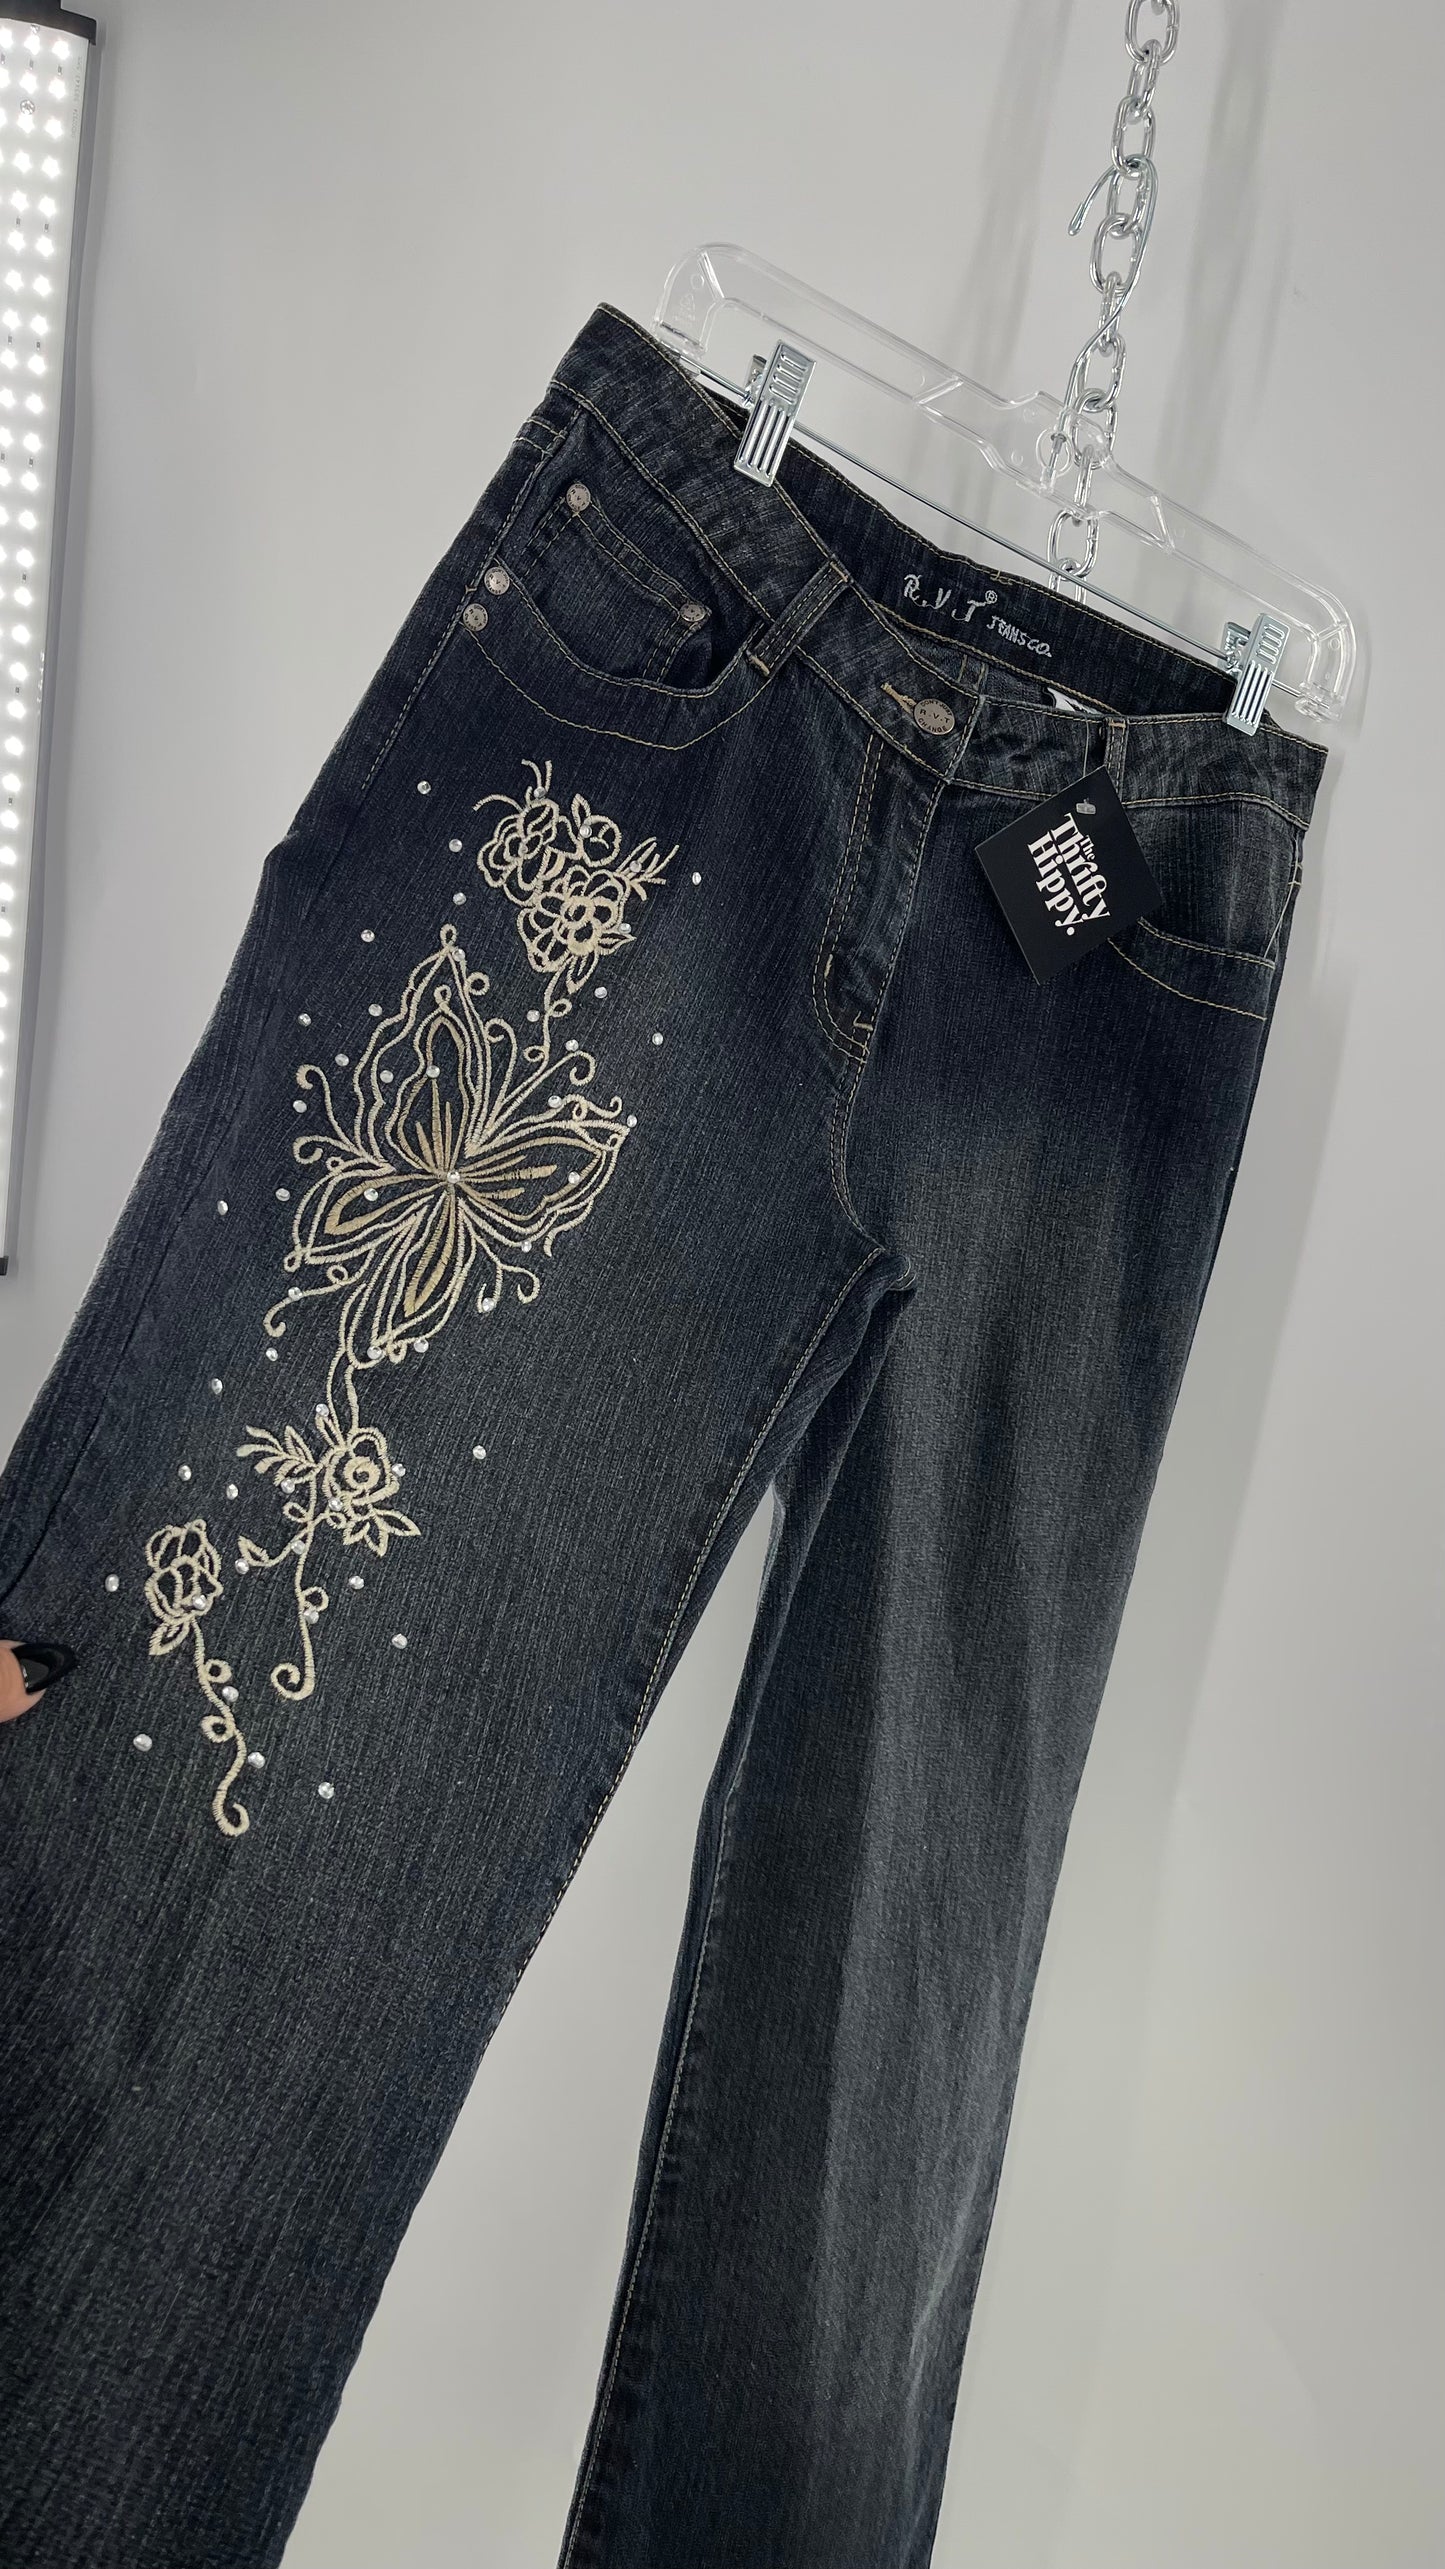 Vintage RVT Grey Kickflare Jeans  with Butterfly Embroidery and Rhinestone Embellishment (9/10)